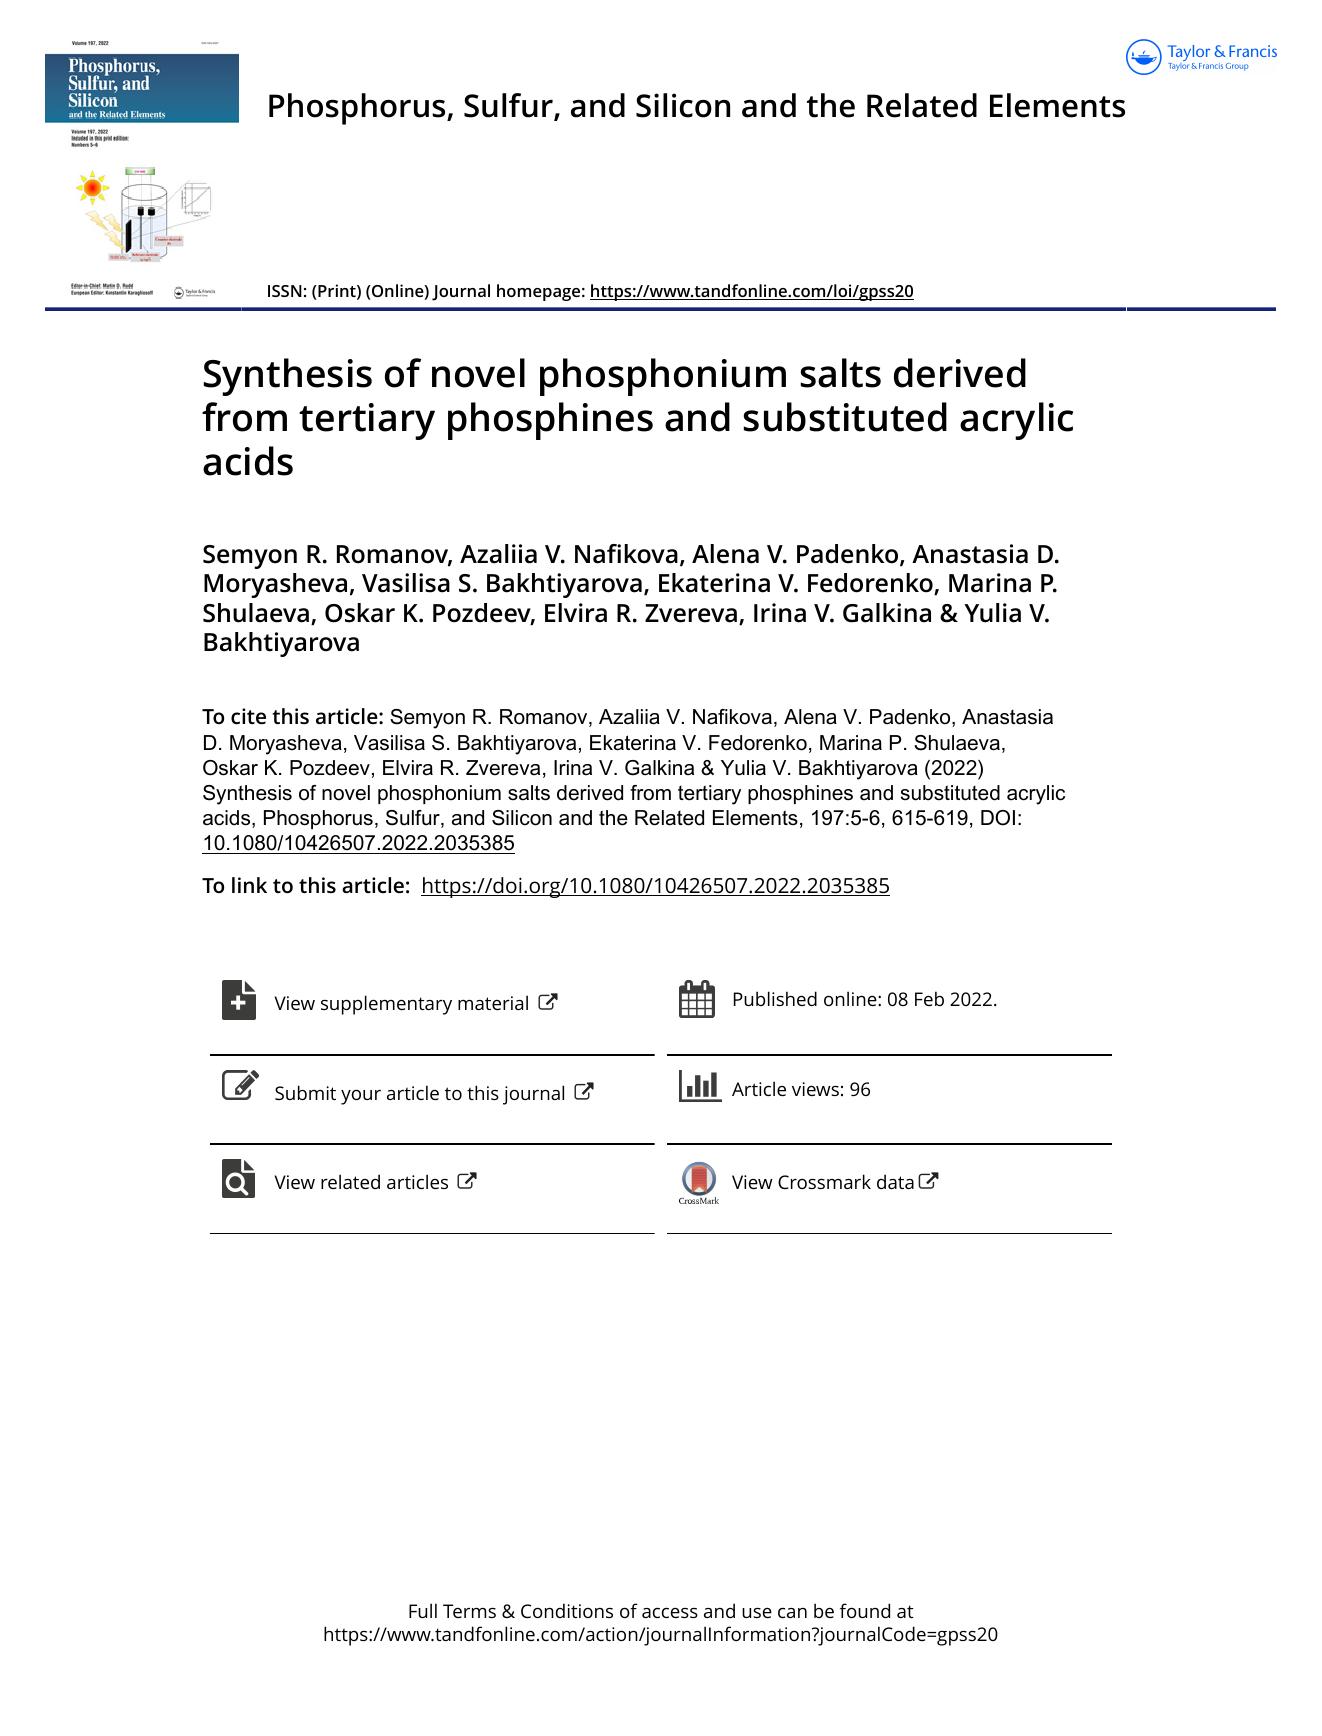 Synthesis of novel phosphonium salts derived from tertiary phosphines and substituted acrylic acids by unknow